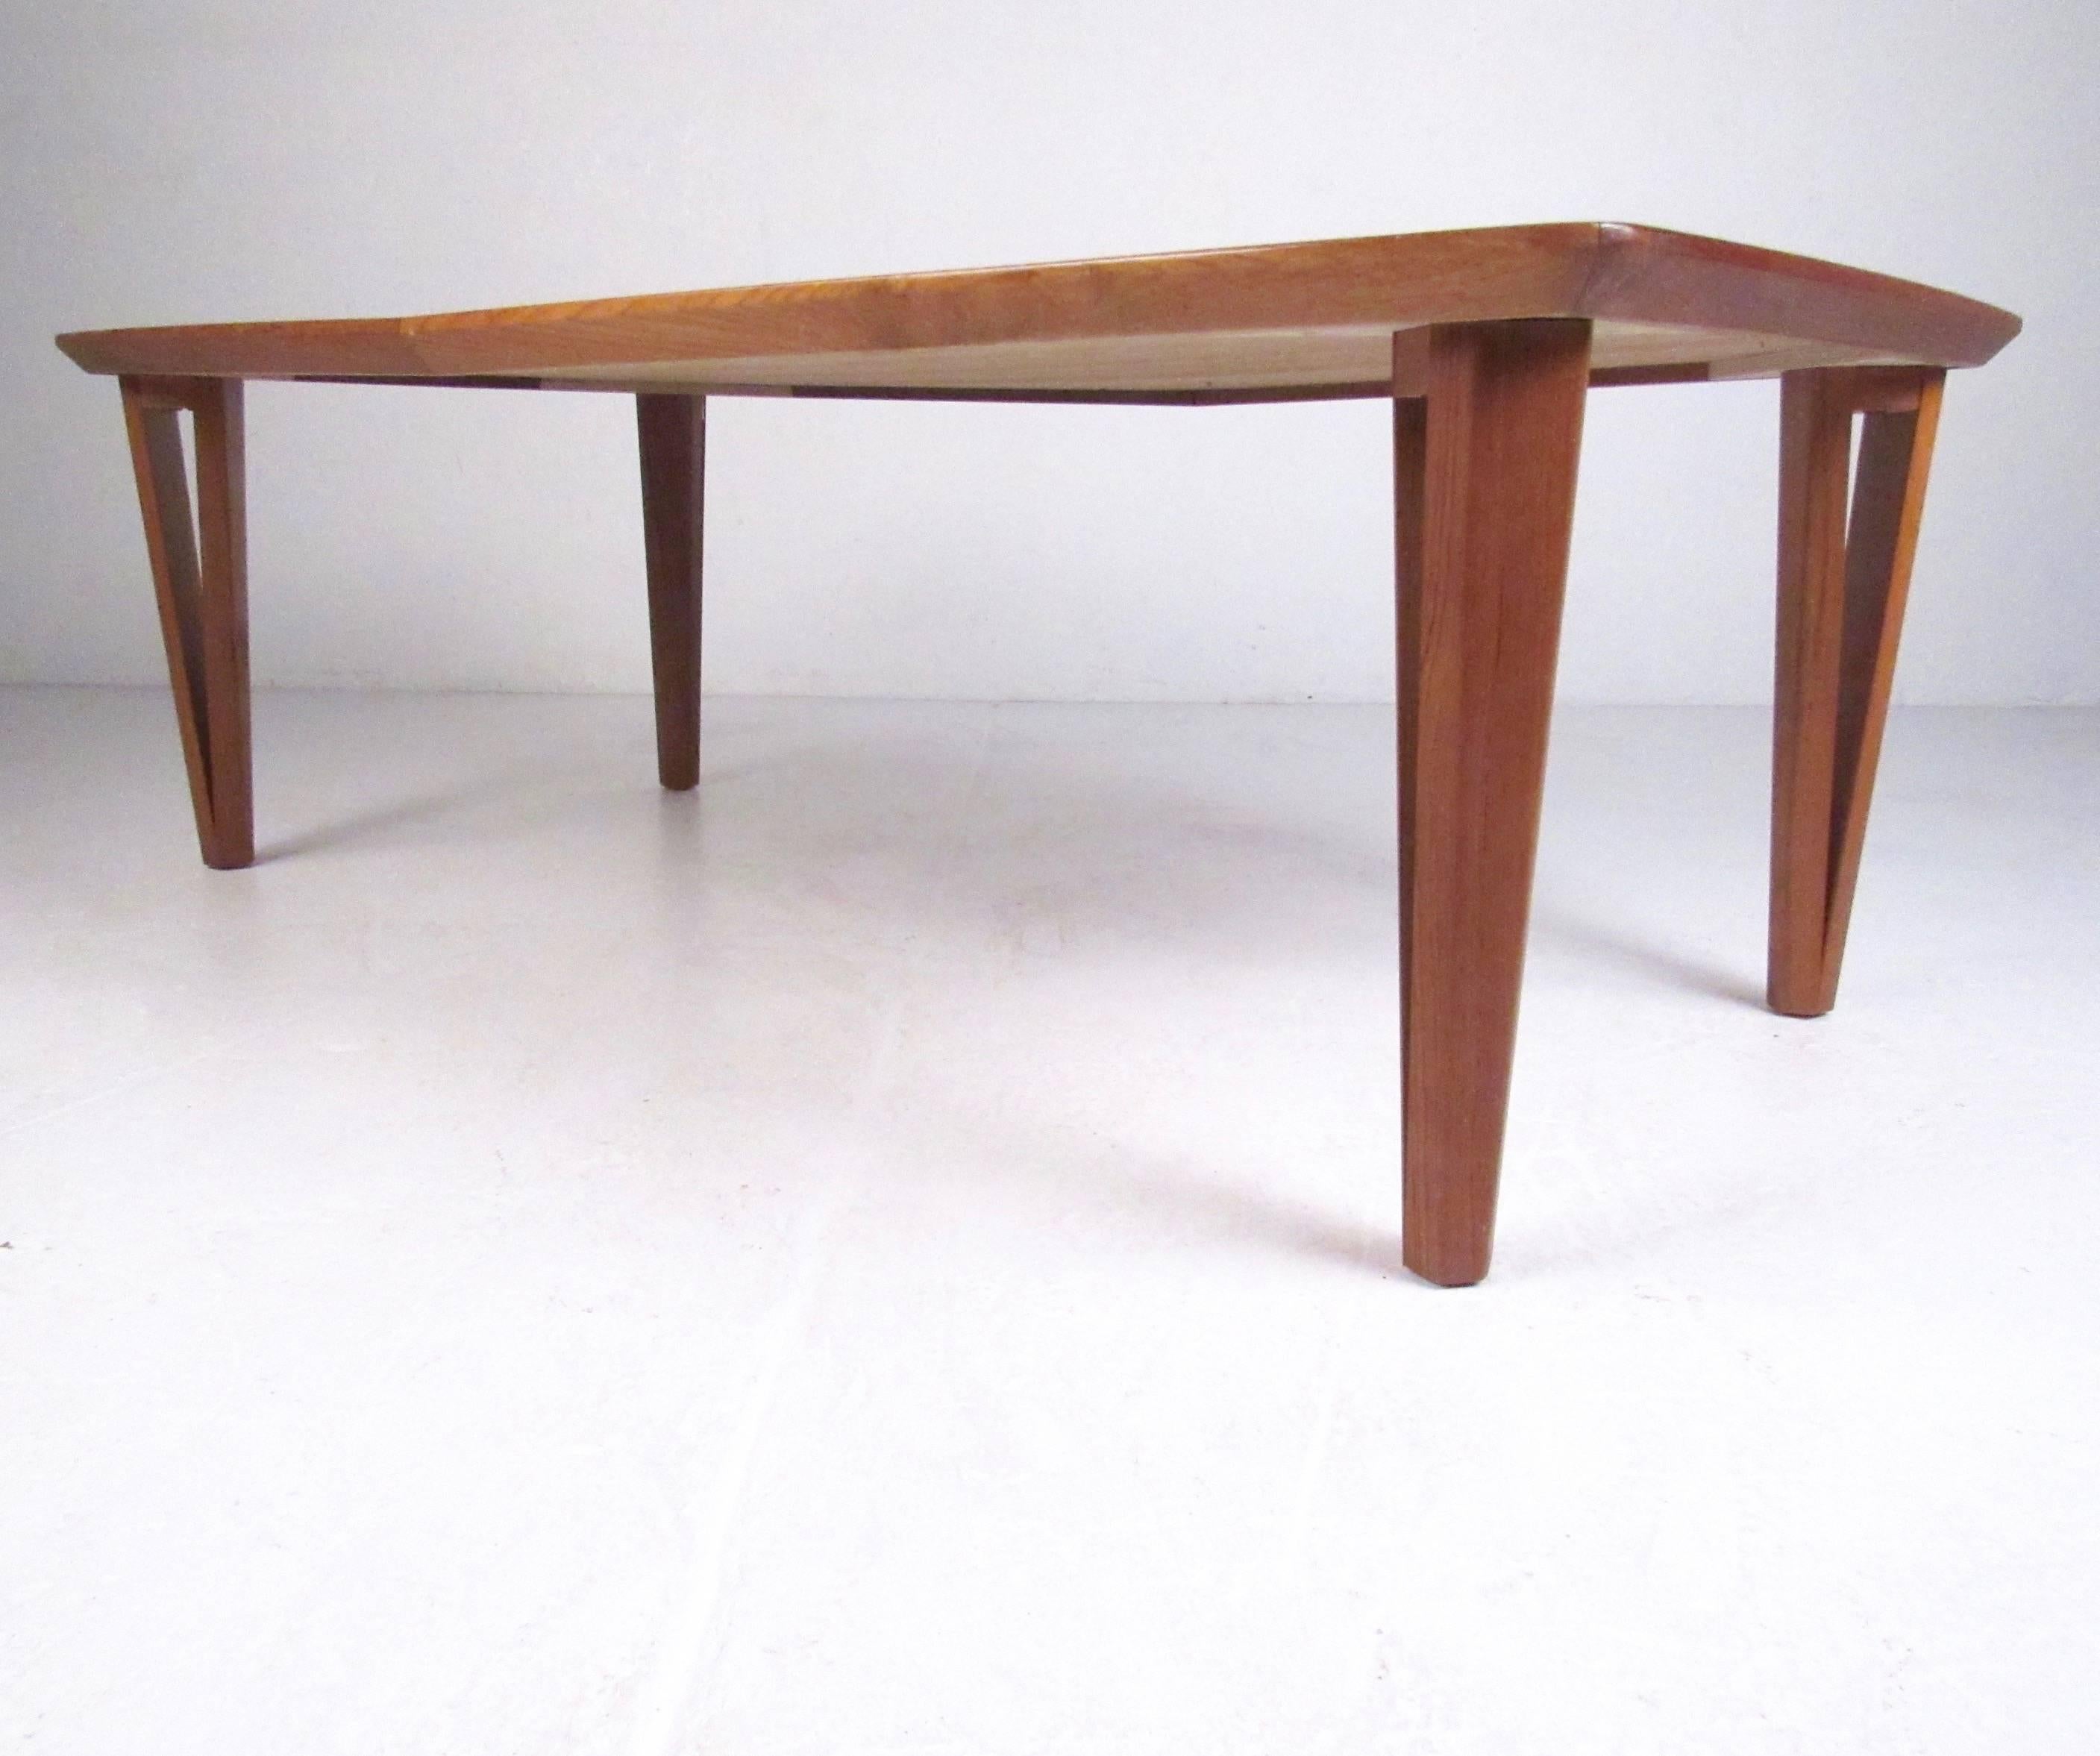 This unique Mid-Century Modern coffee table features stylish and sturdy Danish teak construction and is perfect for home or office. Vintage style showcased with sculpted triangular legs that offer a hairpin feel and add to the impressive